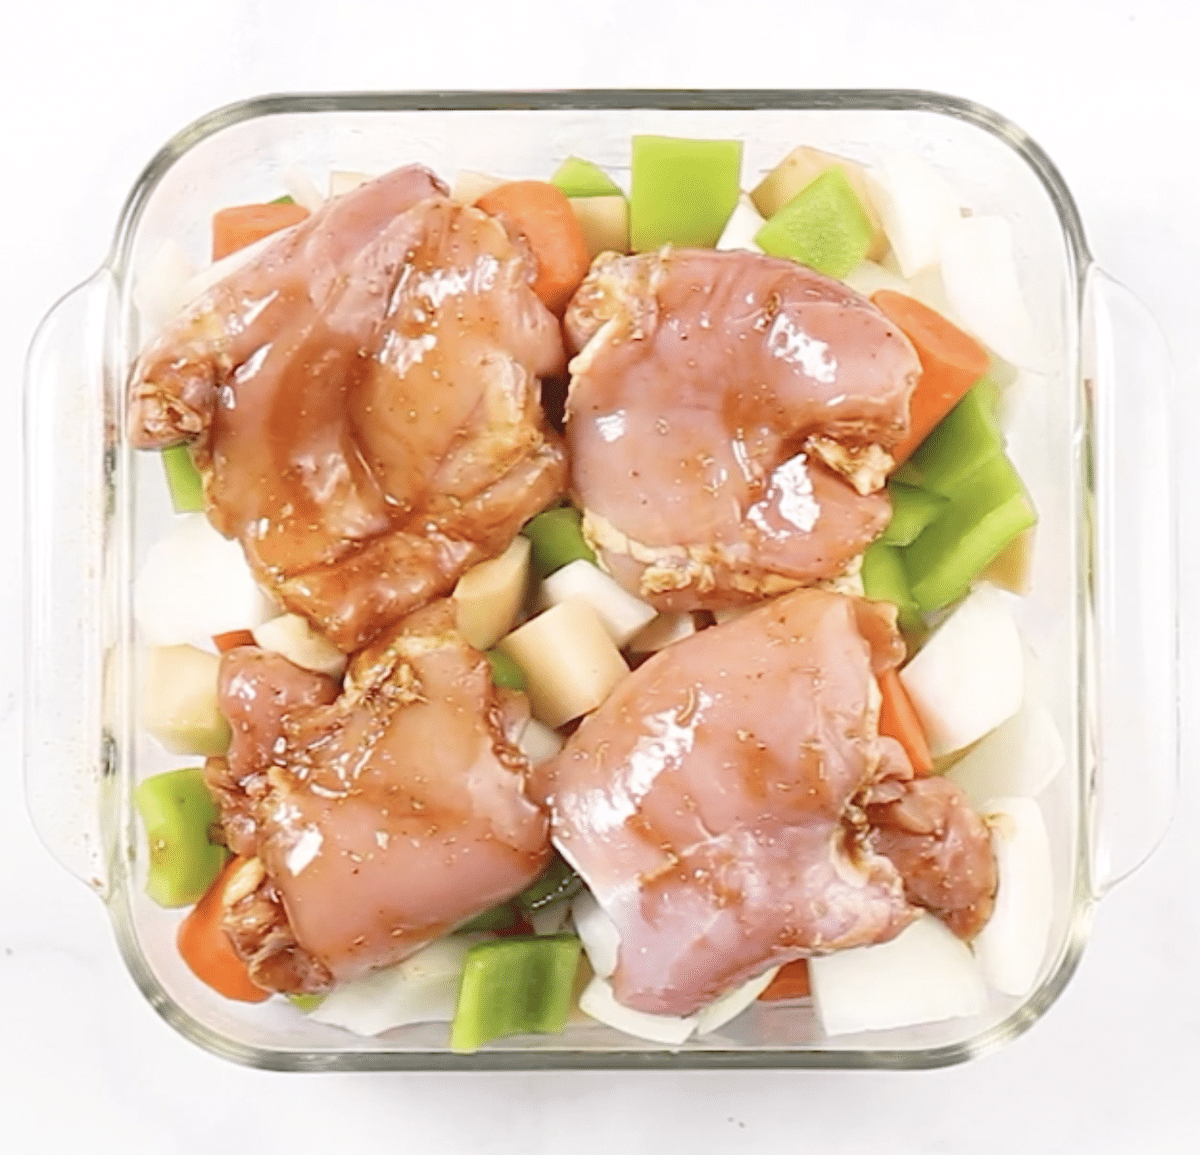 Raw chicken on top of veggies in a glass baking dish